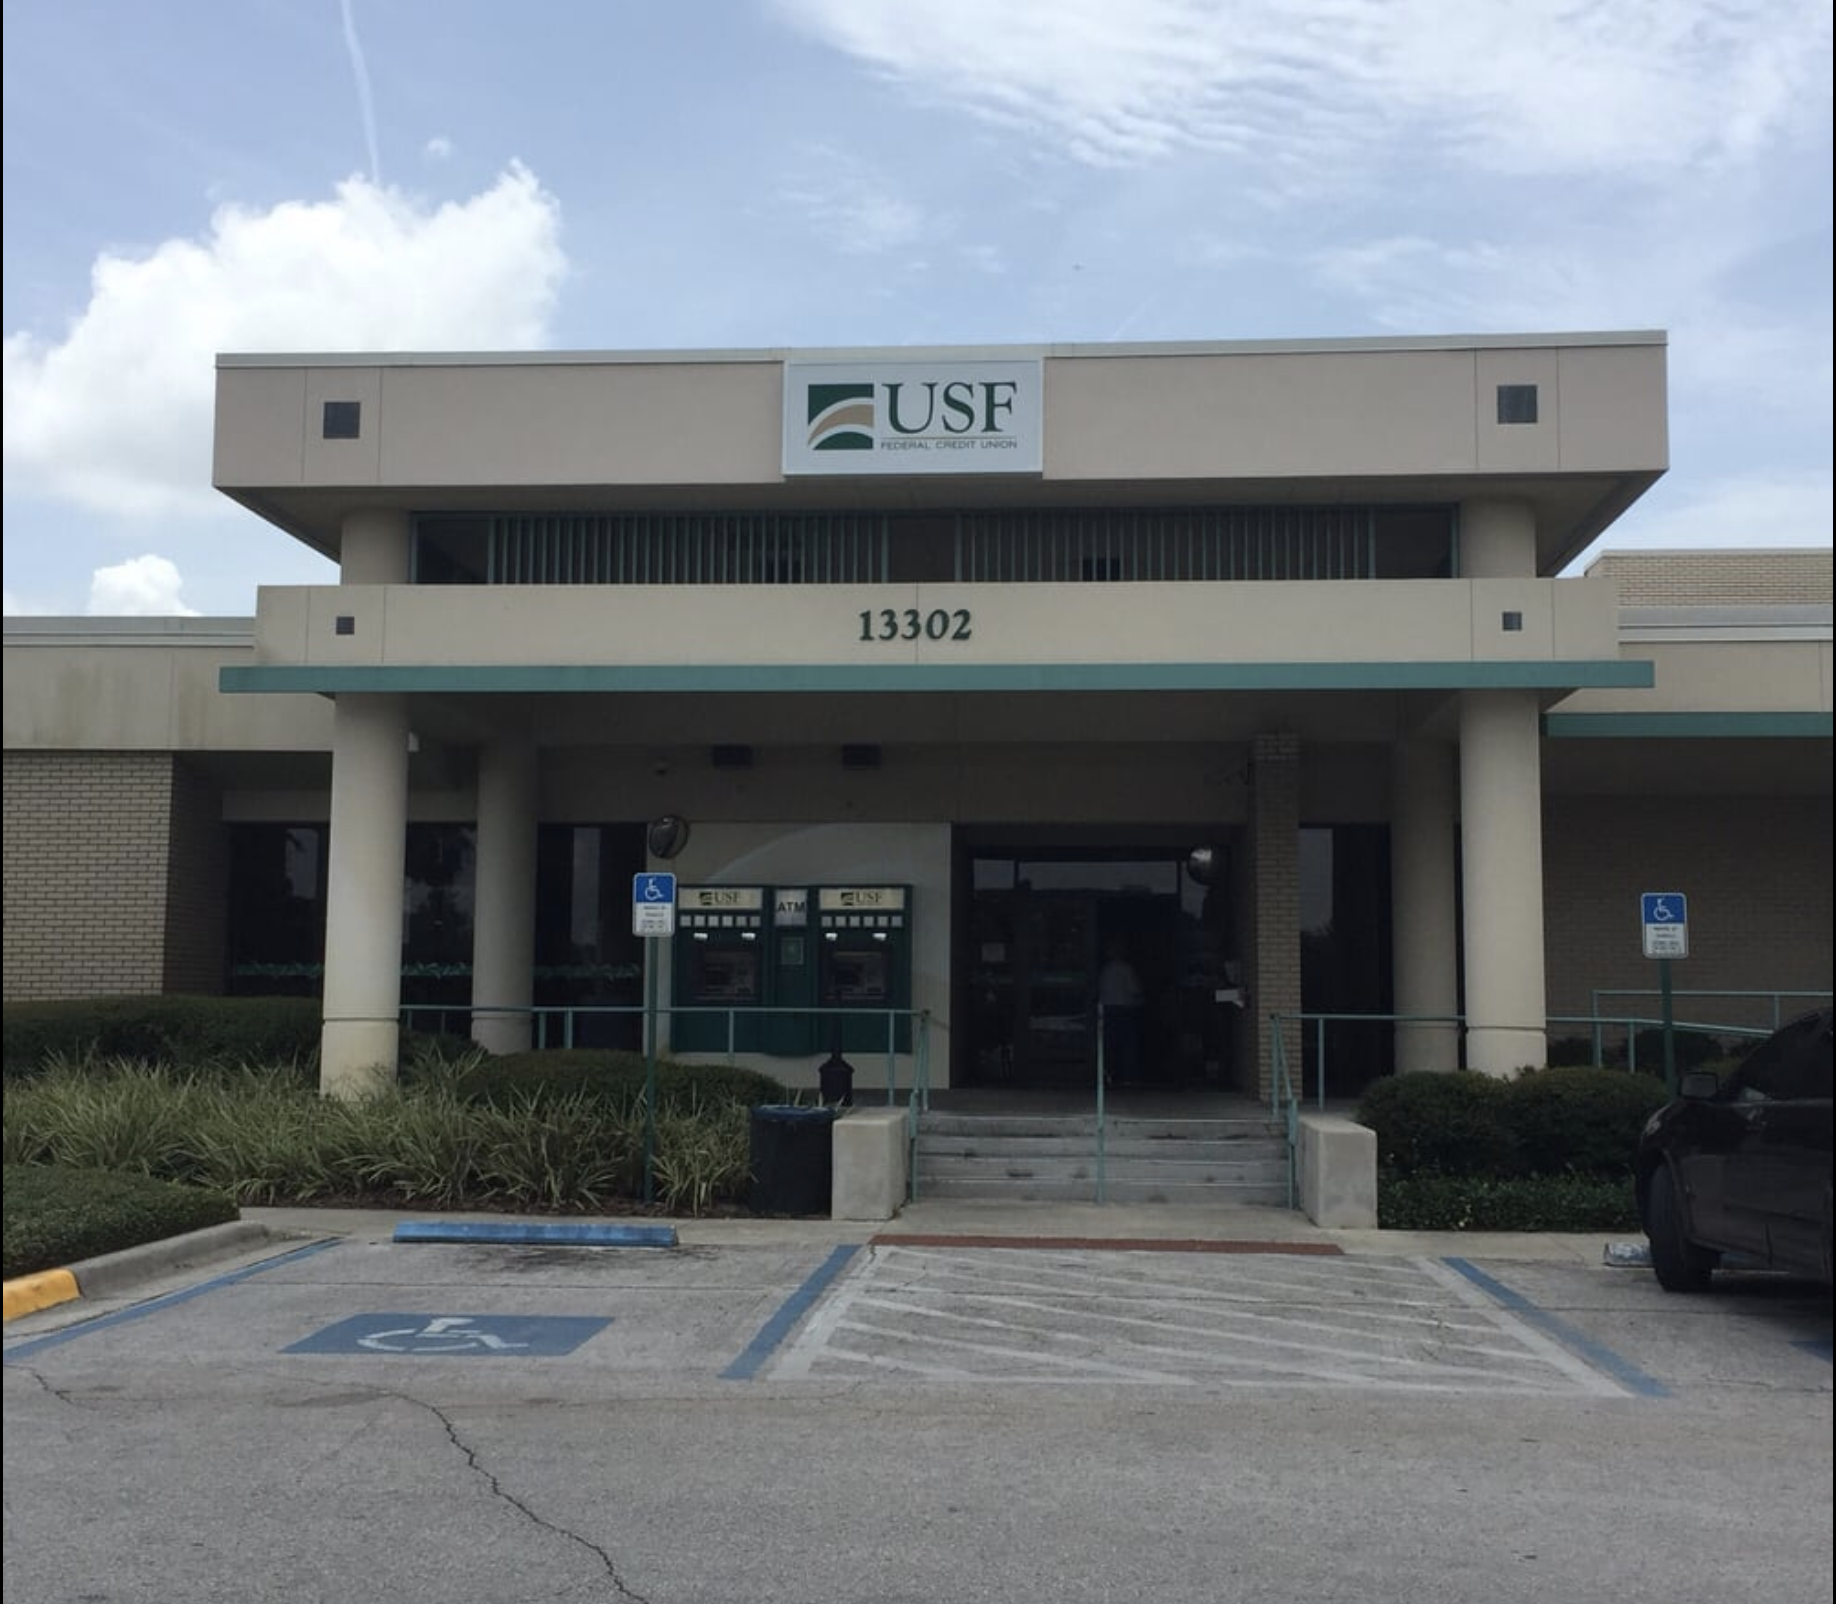 USF Federal Credit Union main building shifting location